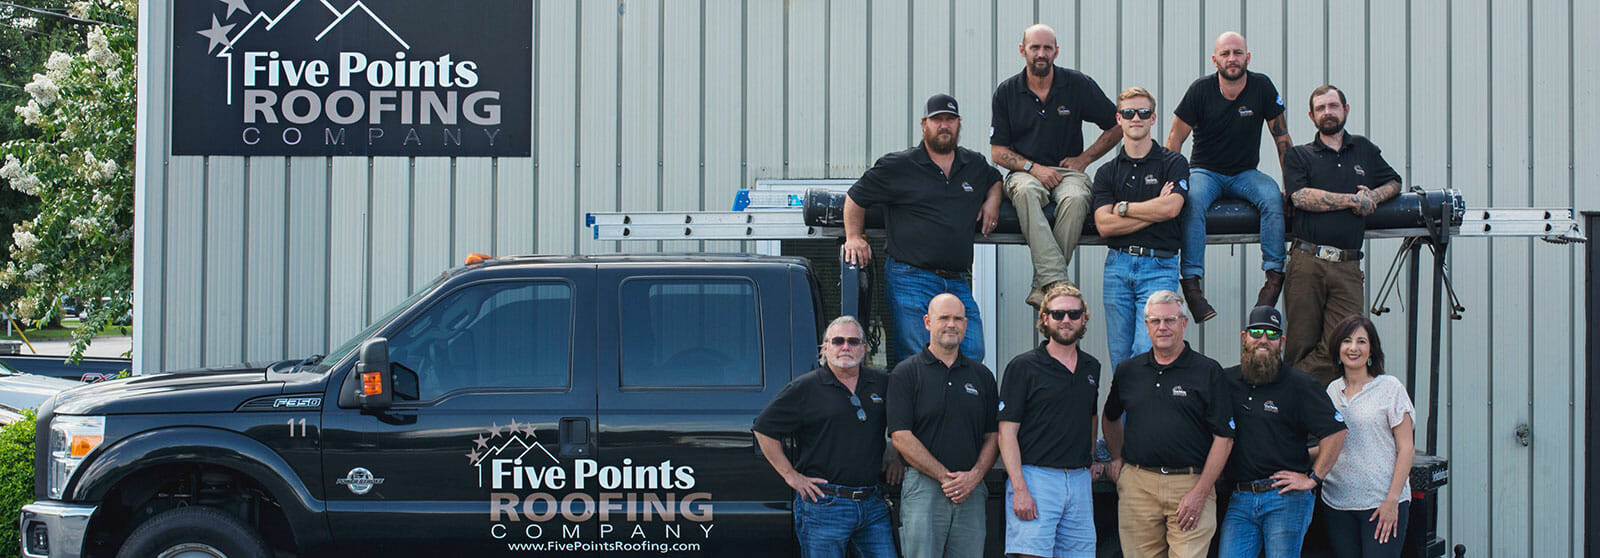 Five Points Roofing Company team photo in front of company truck